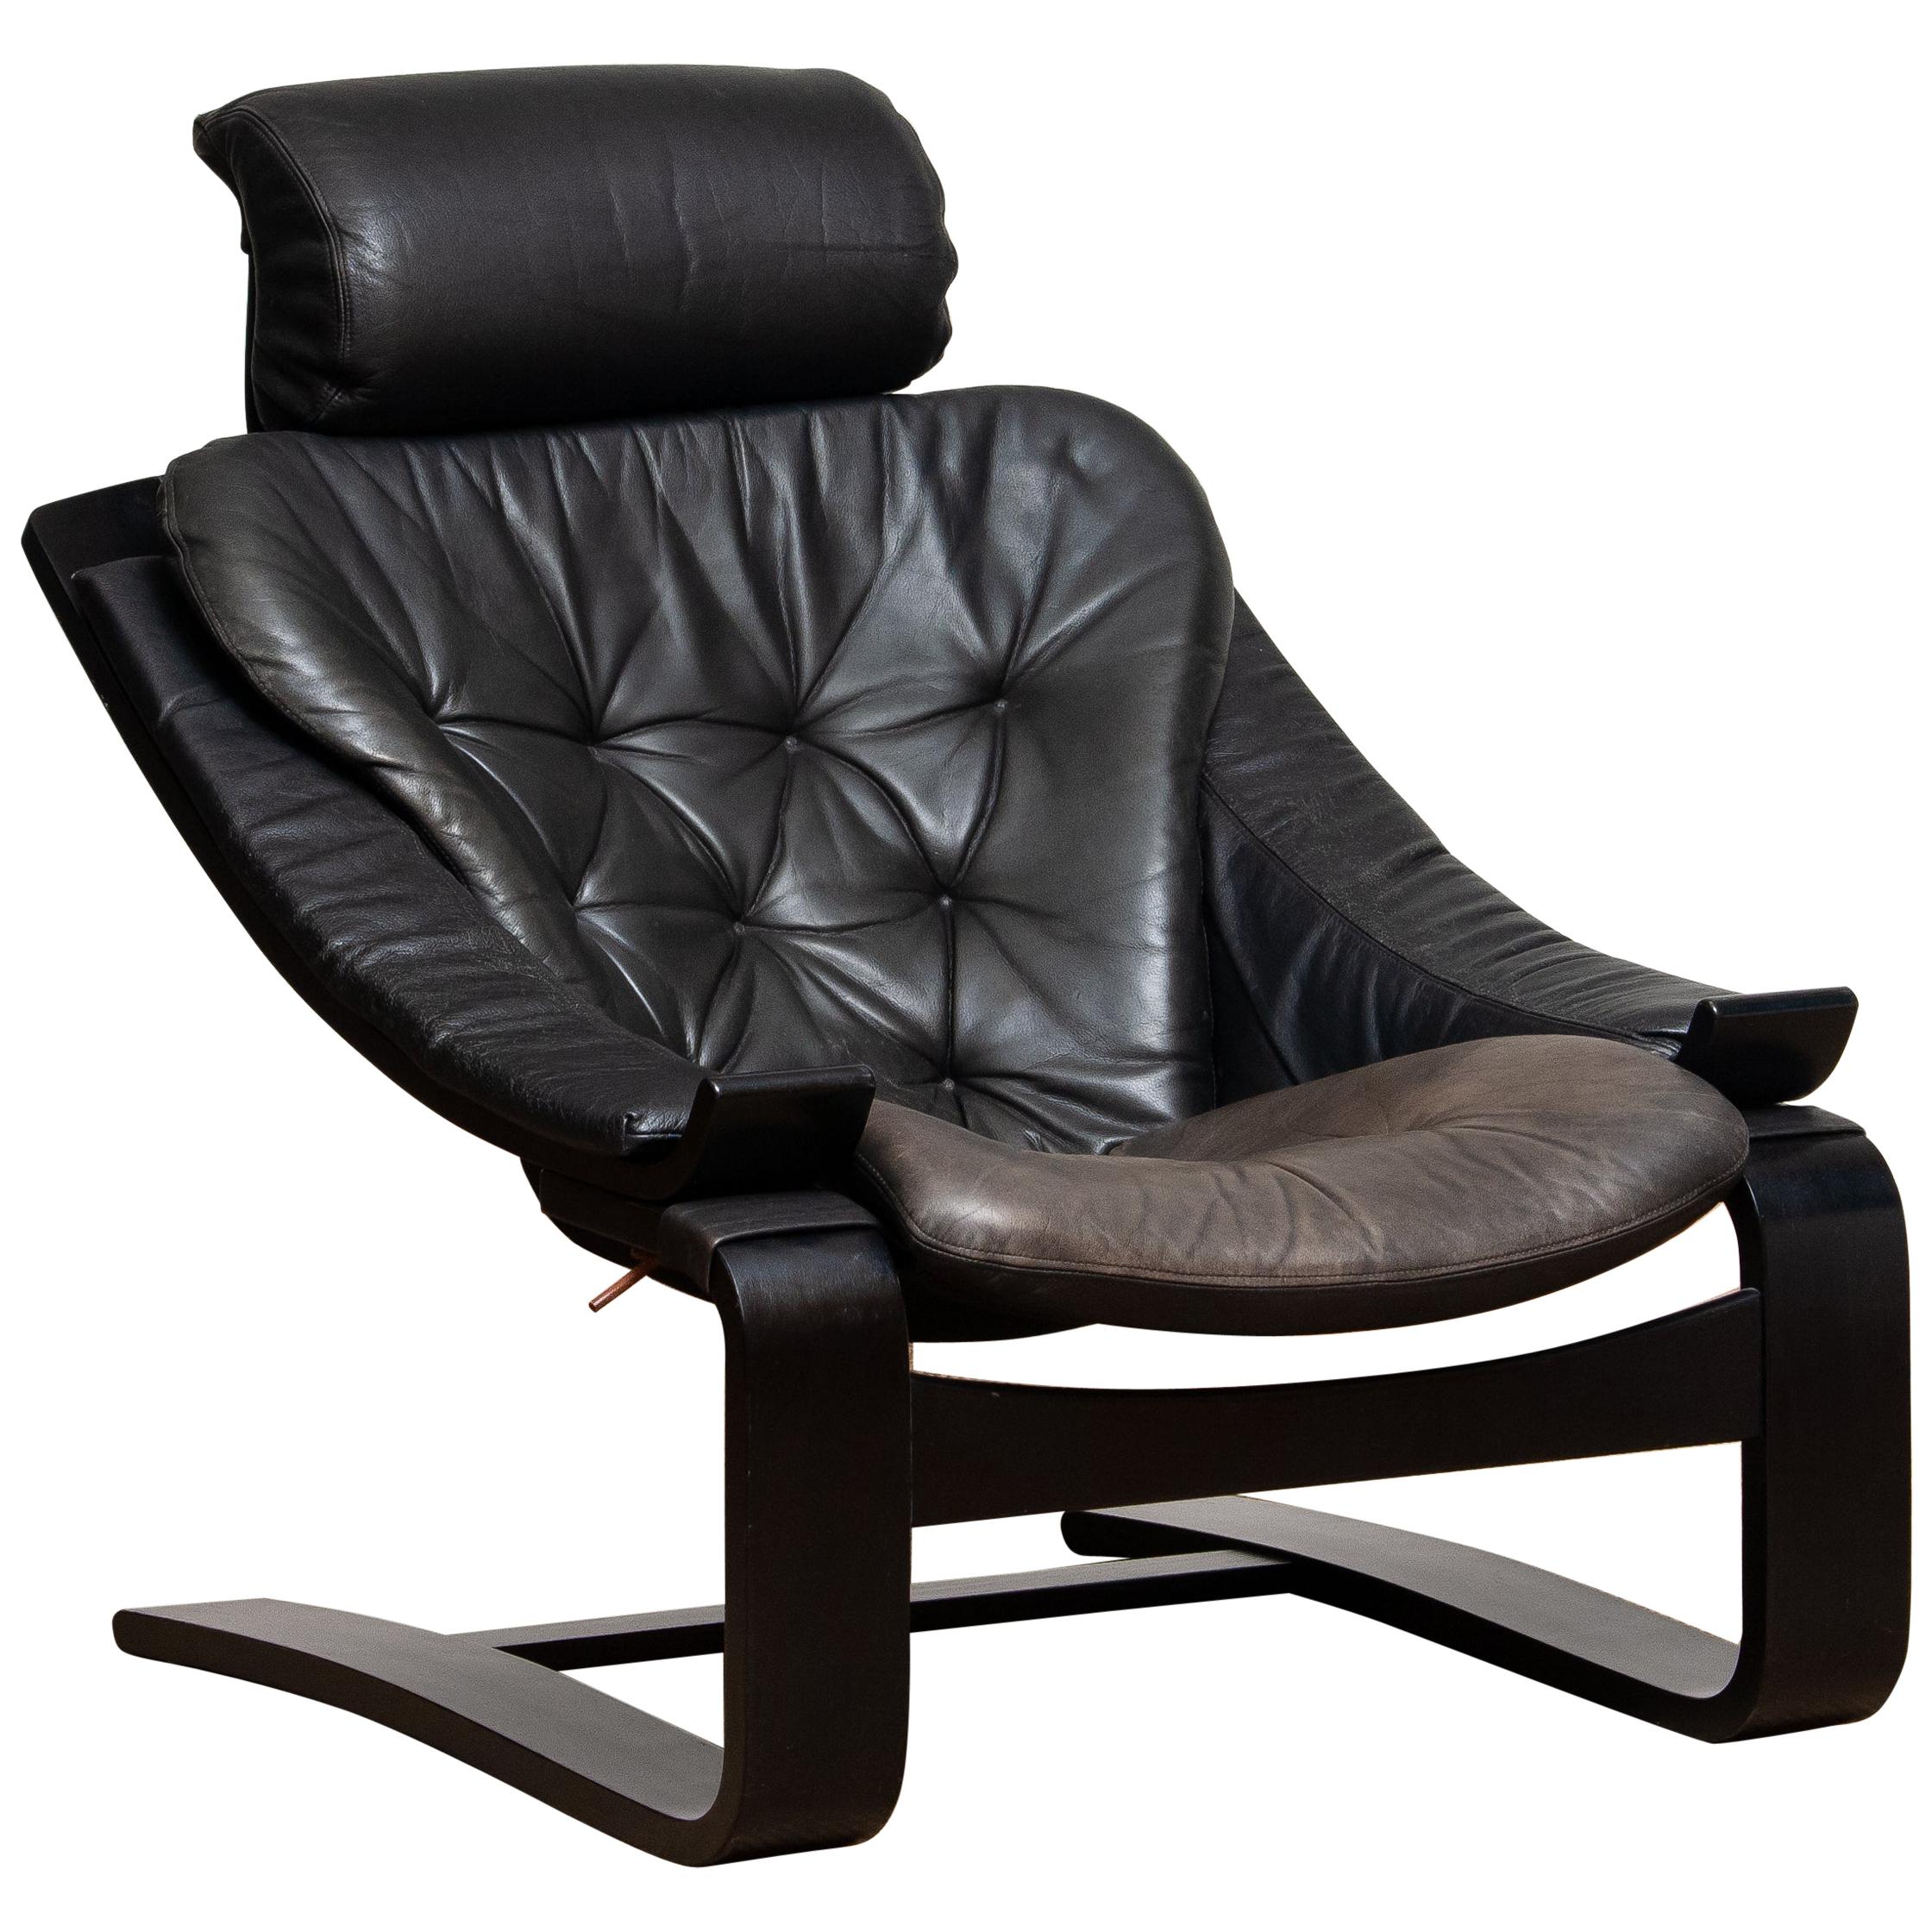 1970s, Black Kroken Lounge Chair by Age Fribytter for Nelo Sweden in Leather